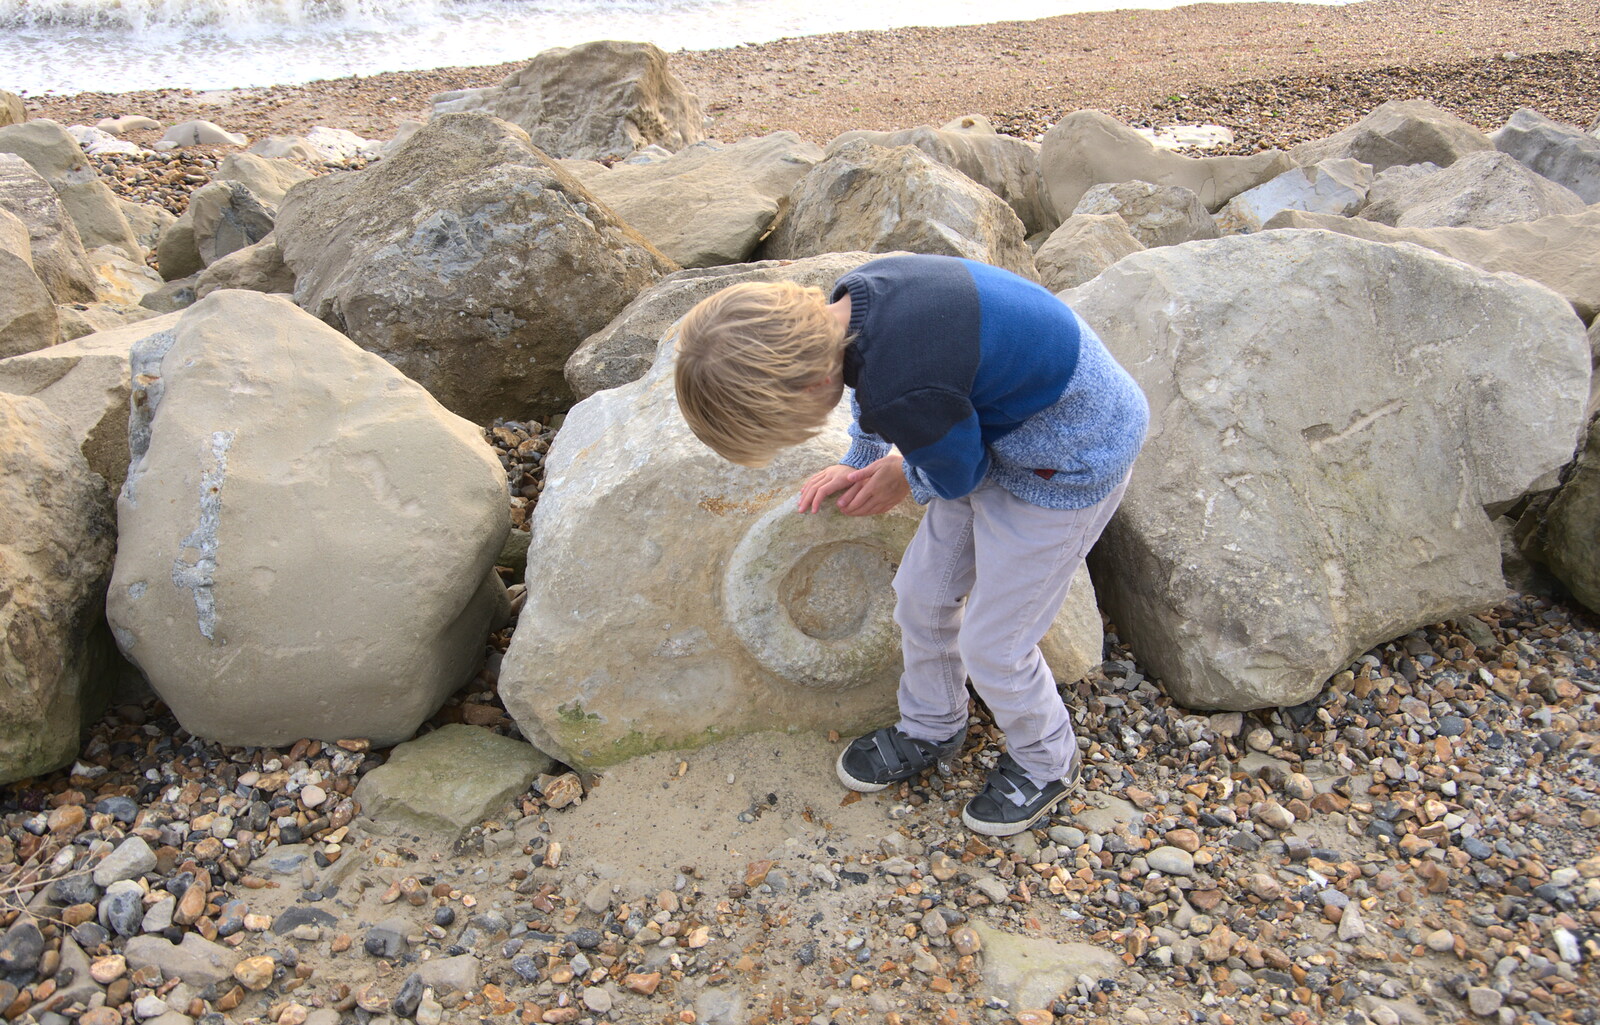 Harry's excited to find an actual fossil in a rock from Thanksgiving in Highcliffe, Dorset - 23rd November 2018